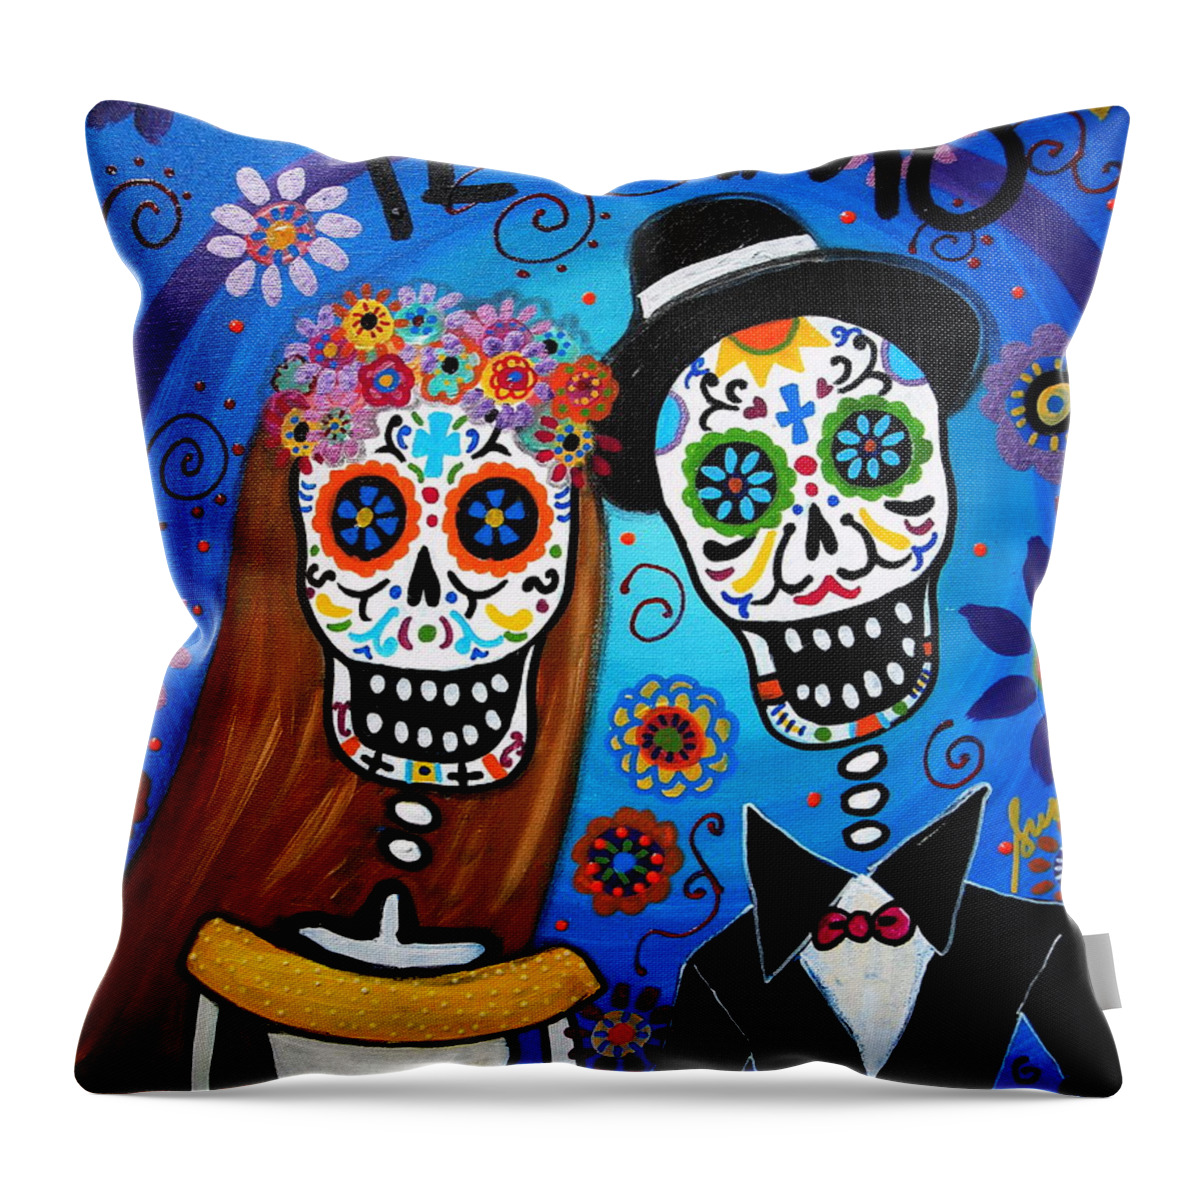 Wedding Throw Pillow featuring the painting Wedding Couple by Pristine Cartera Turkus